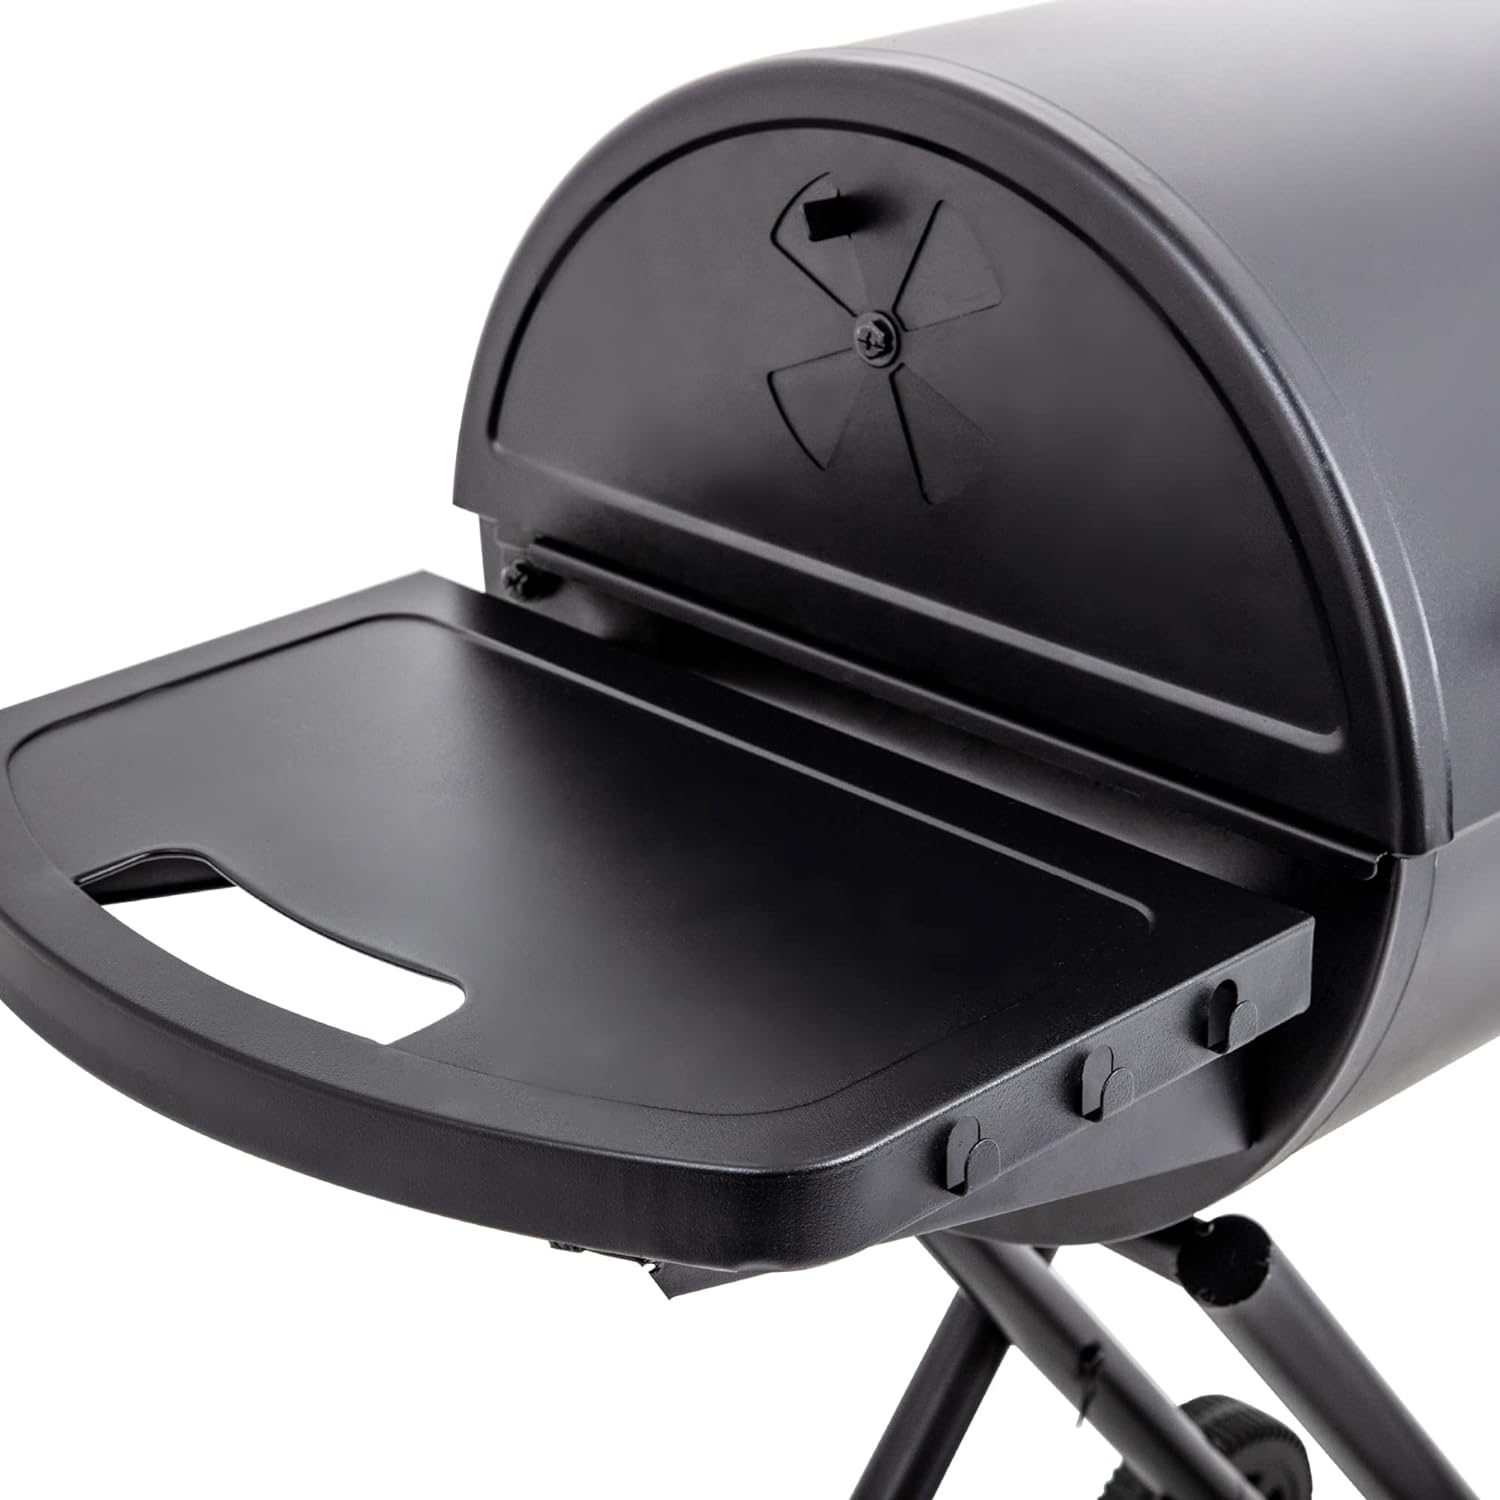 King-Griller Gambler Portable Charcoal Grill in Black by Massage Lab